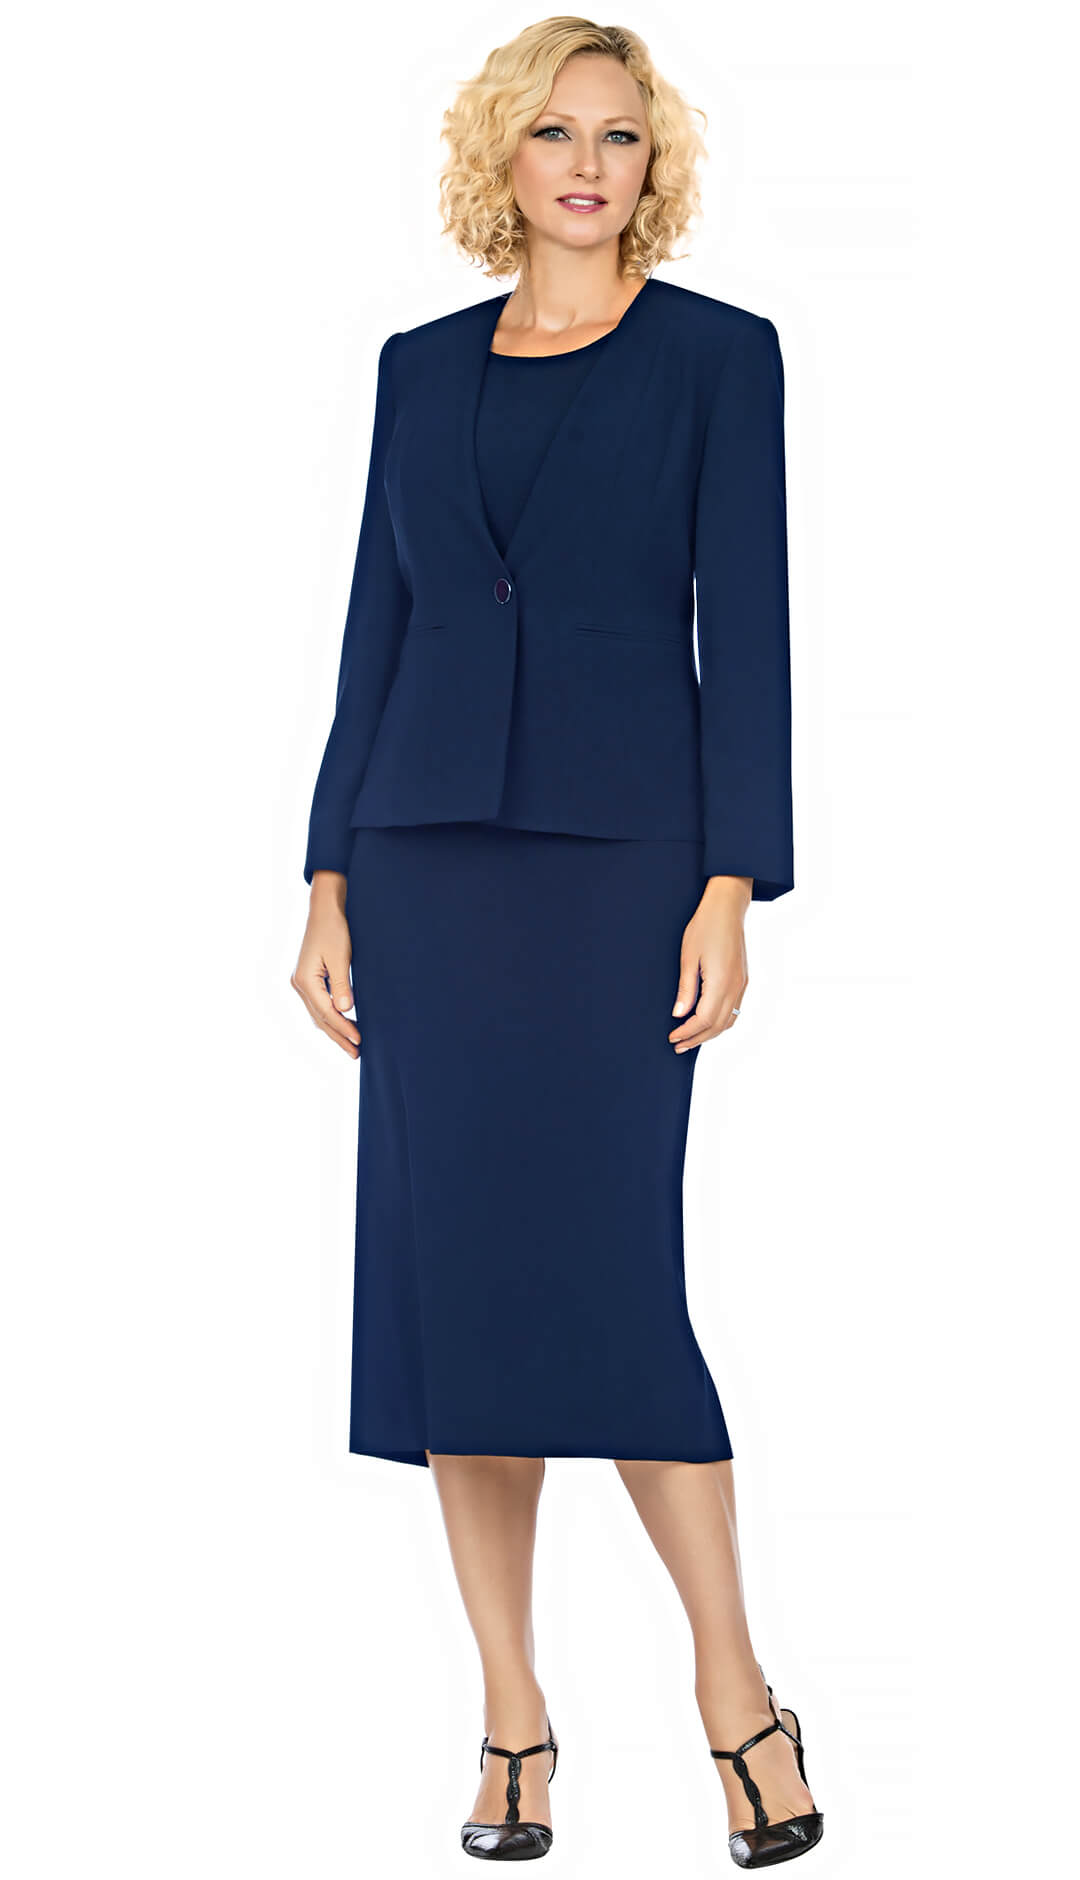 Giovanna Usher Suit S0722C-Dark Navy - Church Suits For Less